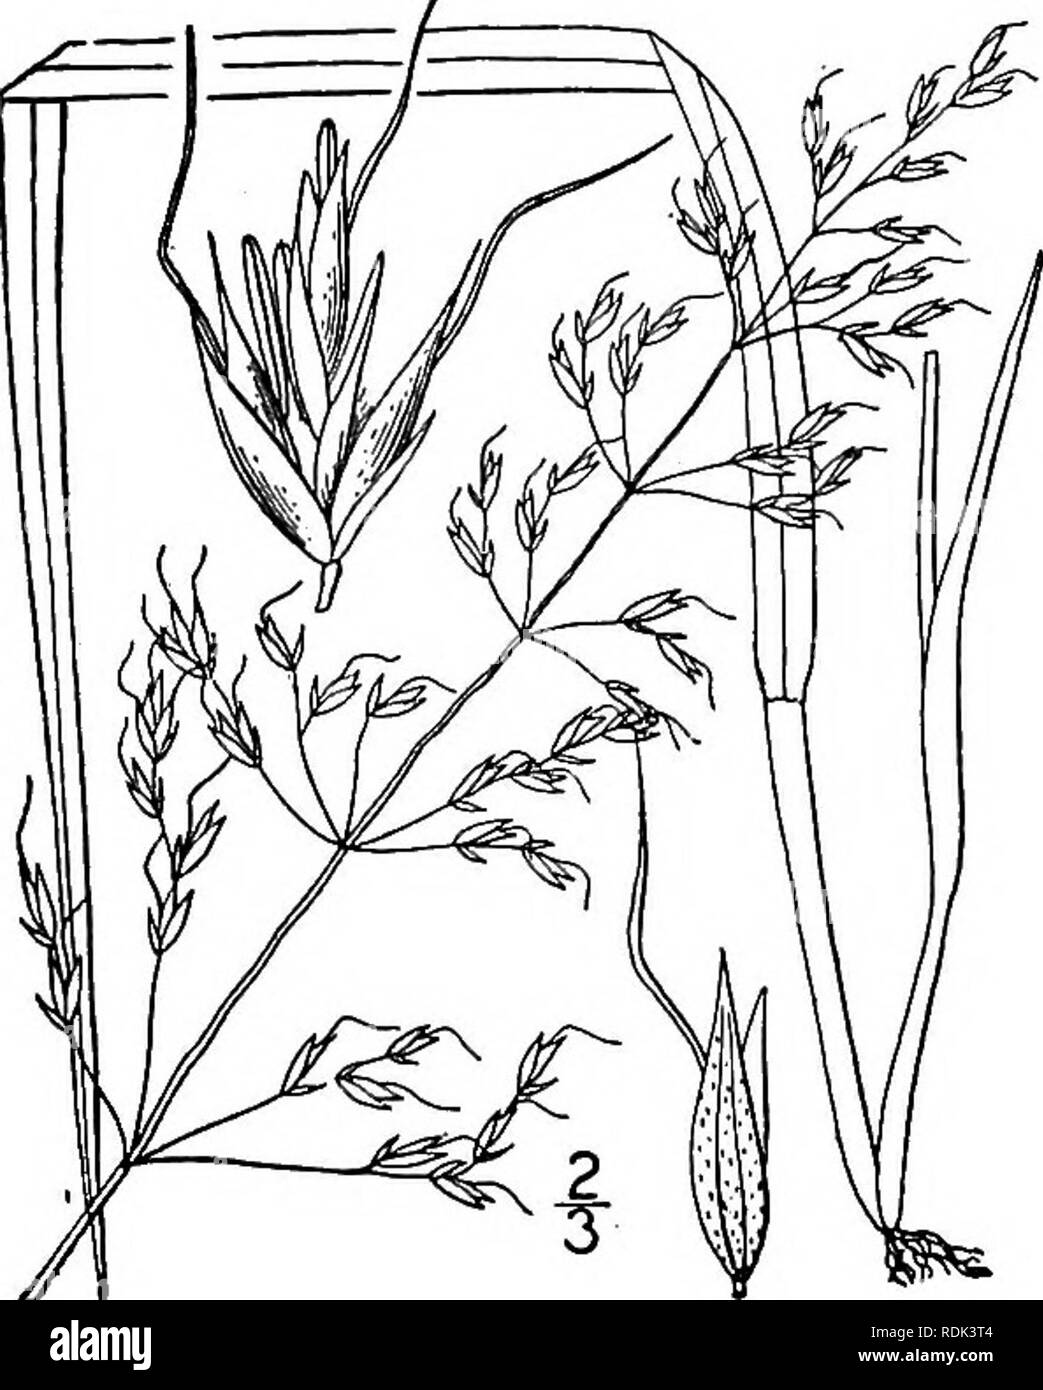 . An illustrated flora of the northern United States, Canada and the British possessions, from Newfoundland to the parallel of the southern boundary of Virginia, and from the Atlantic Ocean westward to the 102d meridian. Botany; Botany. Genus 52. GRASS FAMILY. 217 1. Trisetum spicatum (L.) Richter. Narrow False Oat. Fig. 523. Aira spicata L. Sp. PI. 64. 1753. Aira subspicata L. Syst. Veg. Ed. io, 673. 1759. Avena mollis Michx. Fl. Bor. Am. 1: 72. 1803. Trisetum subspicatum Beauv. Agrost. 180. 1812. T. spicatum Richter, PI. Europ. 1: 59. 1890. Softly pubescent or glabrous, culms 6'-2G tall, ere Stock Photo